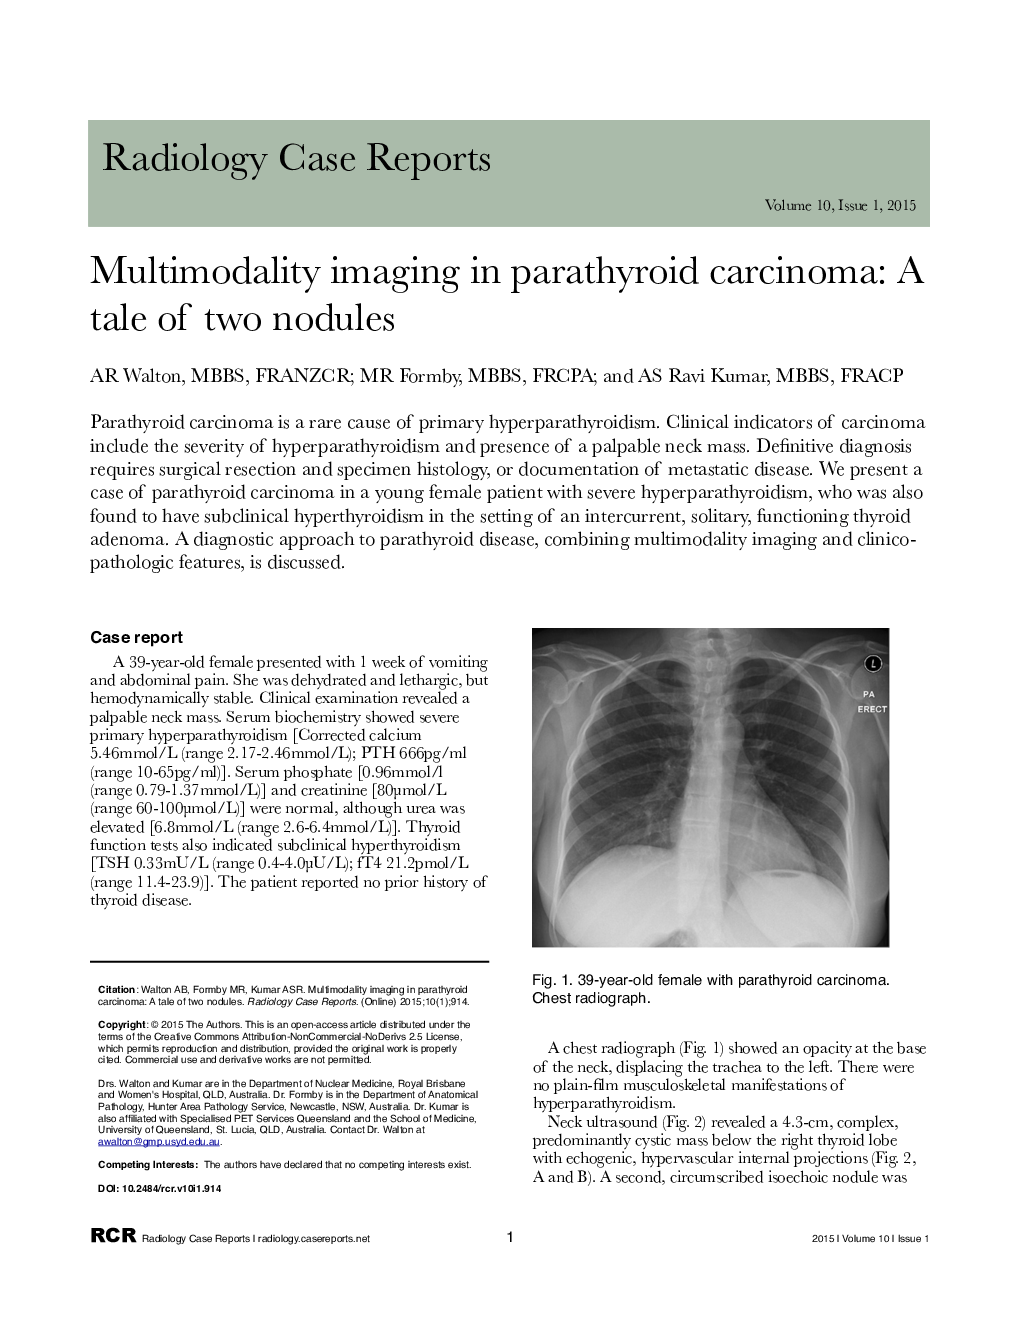 Multimodality imaging in parathyroid carcinoma: A tale of two nodules